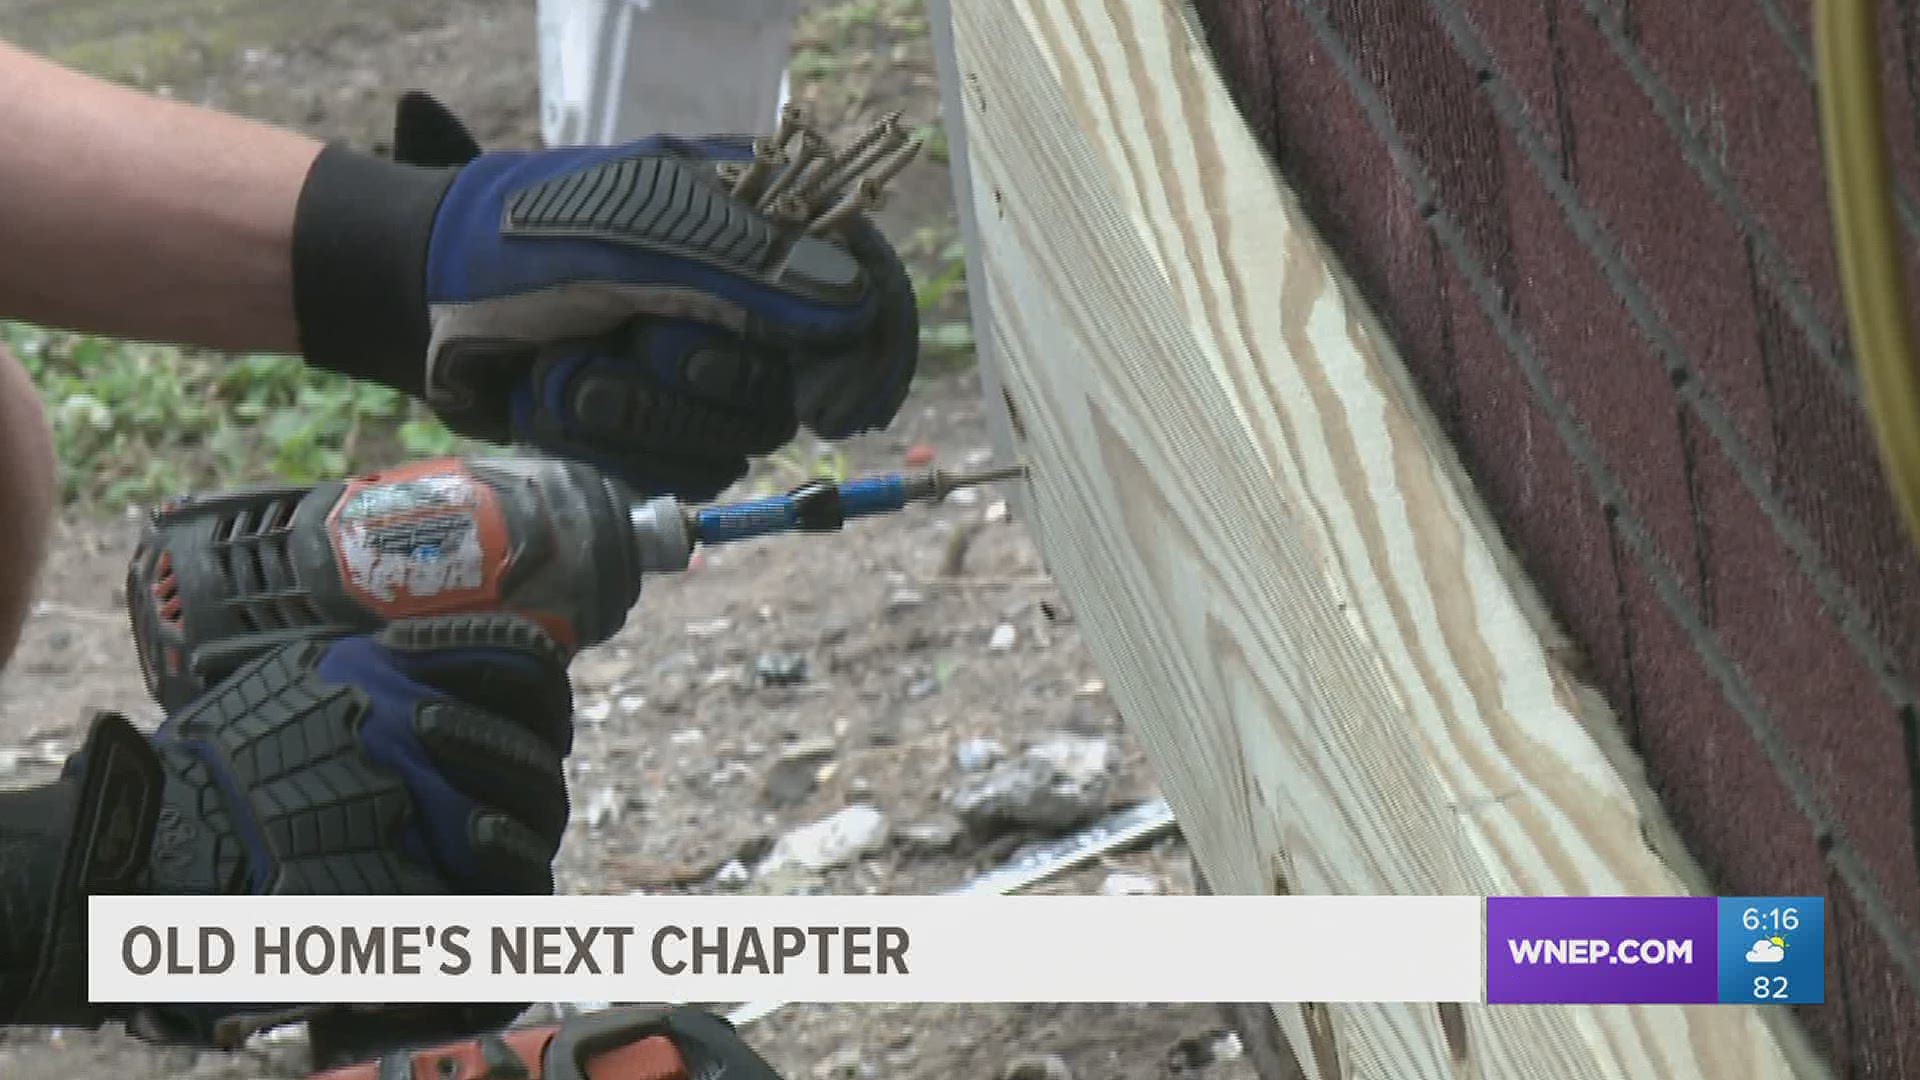 Volunteers spent the day fixing up a home in Luzerne County Saturday for a family in need.